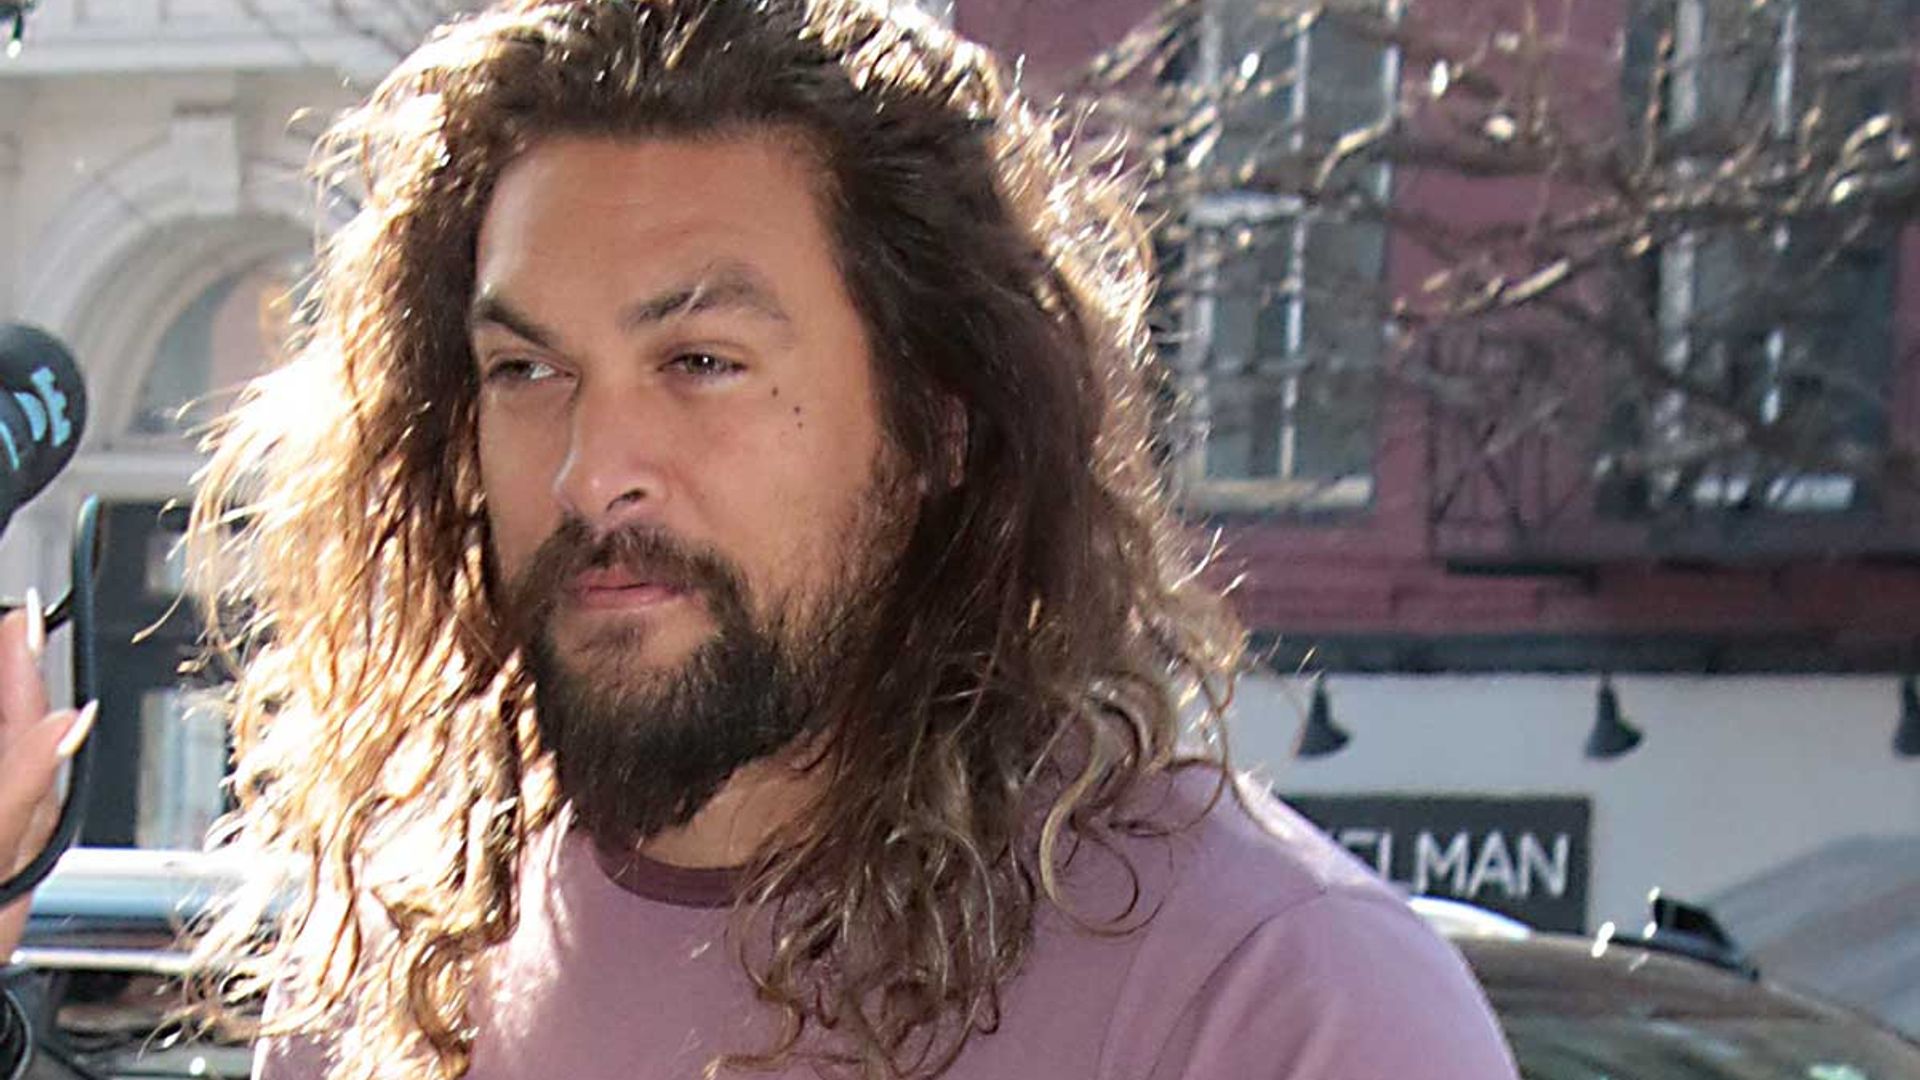 Jason Momoa inundated with support after alarming hospital photo